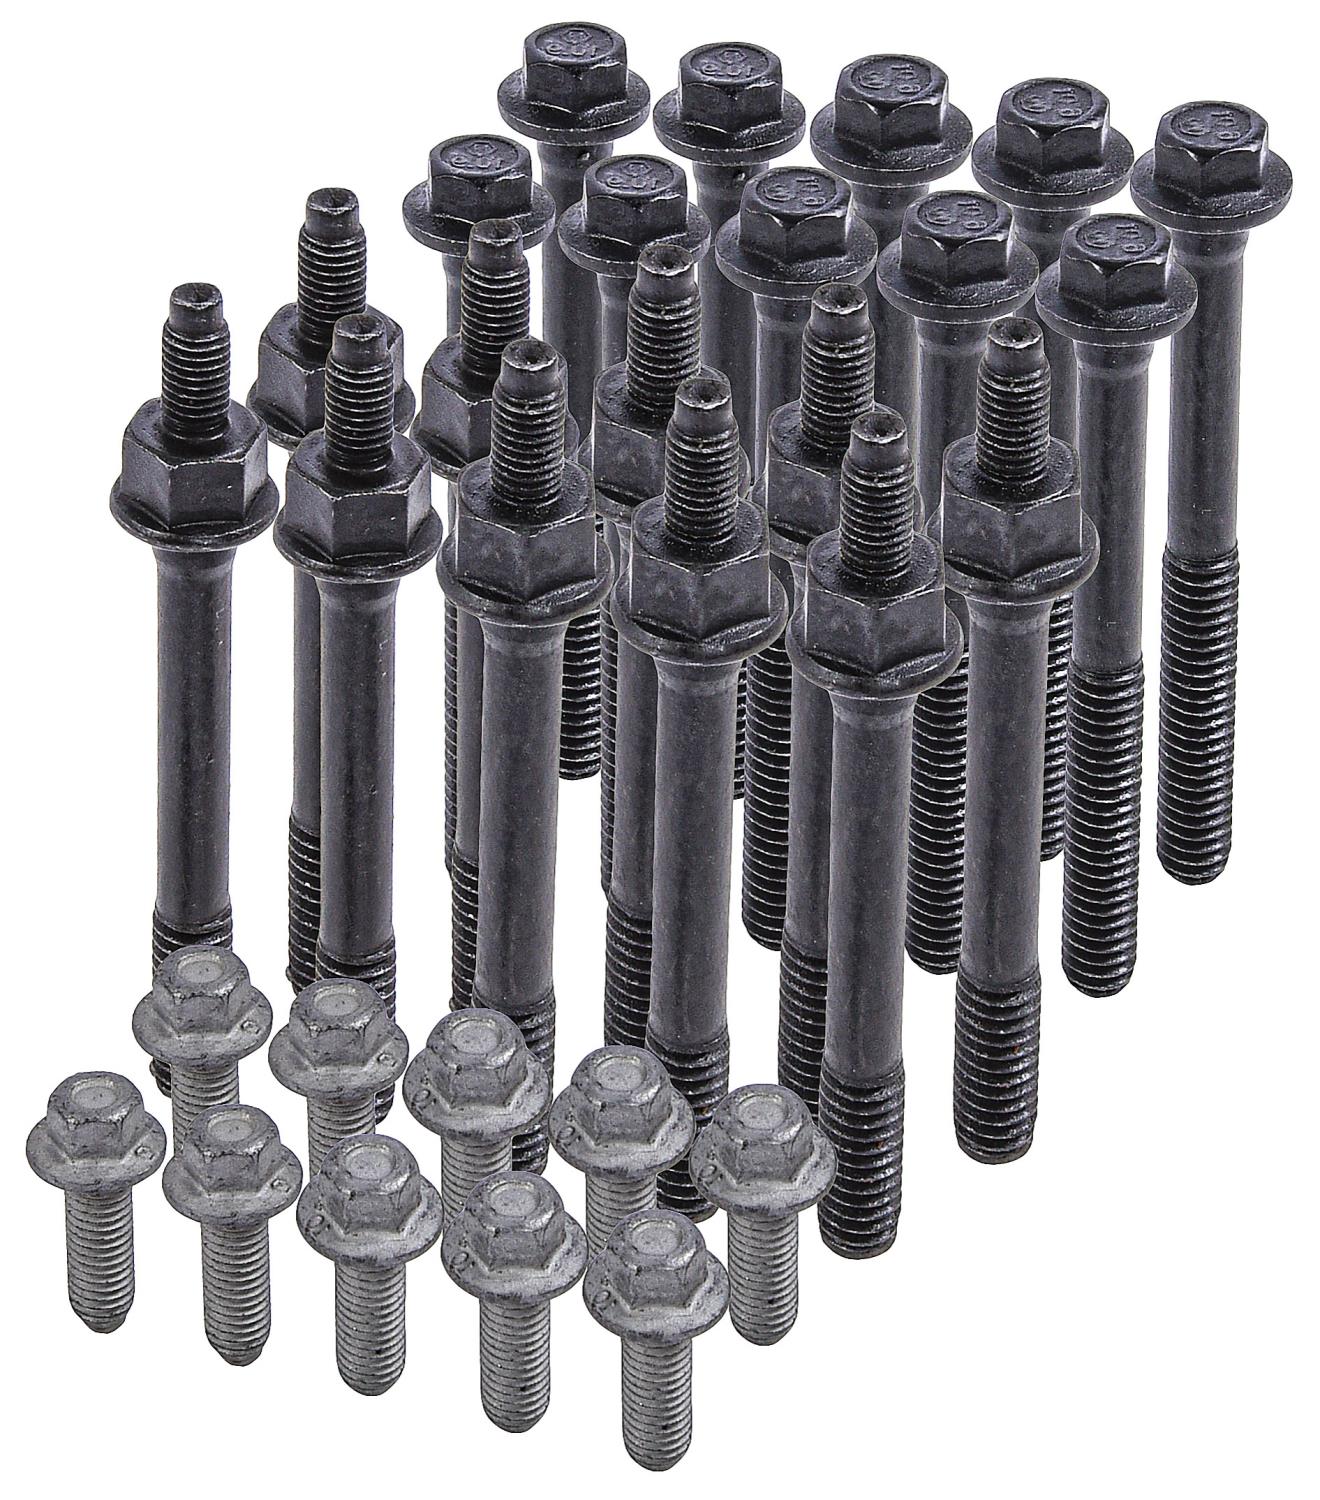 Main Bearing Cap Bolt Kit for Chevy Small Block LS-based Engines [6-bolt Style]